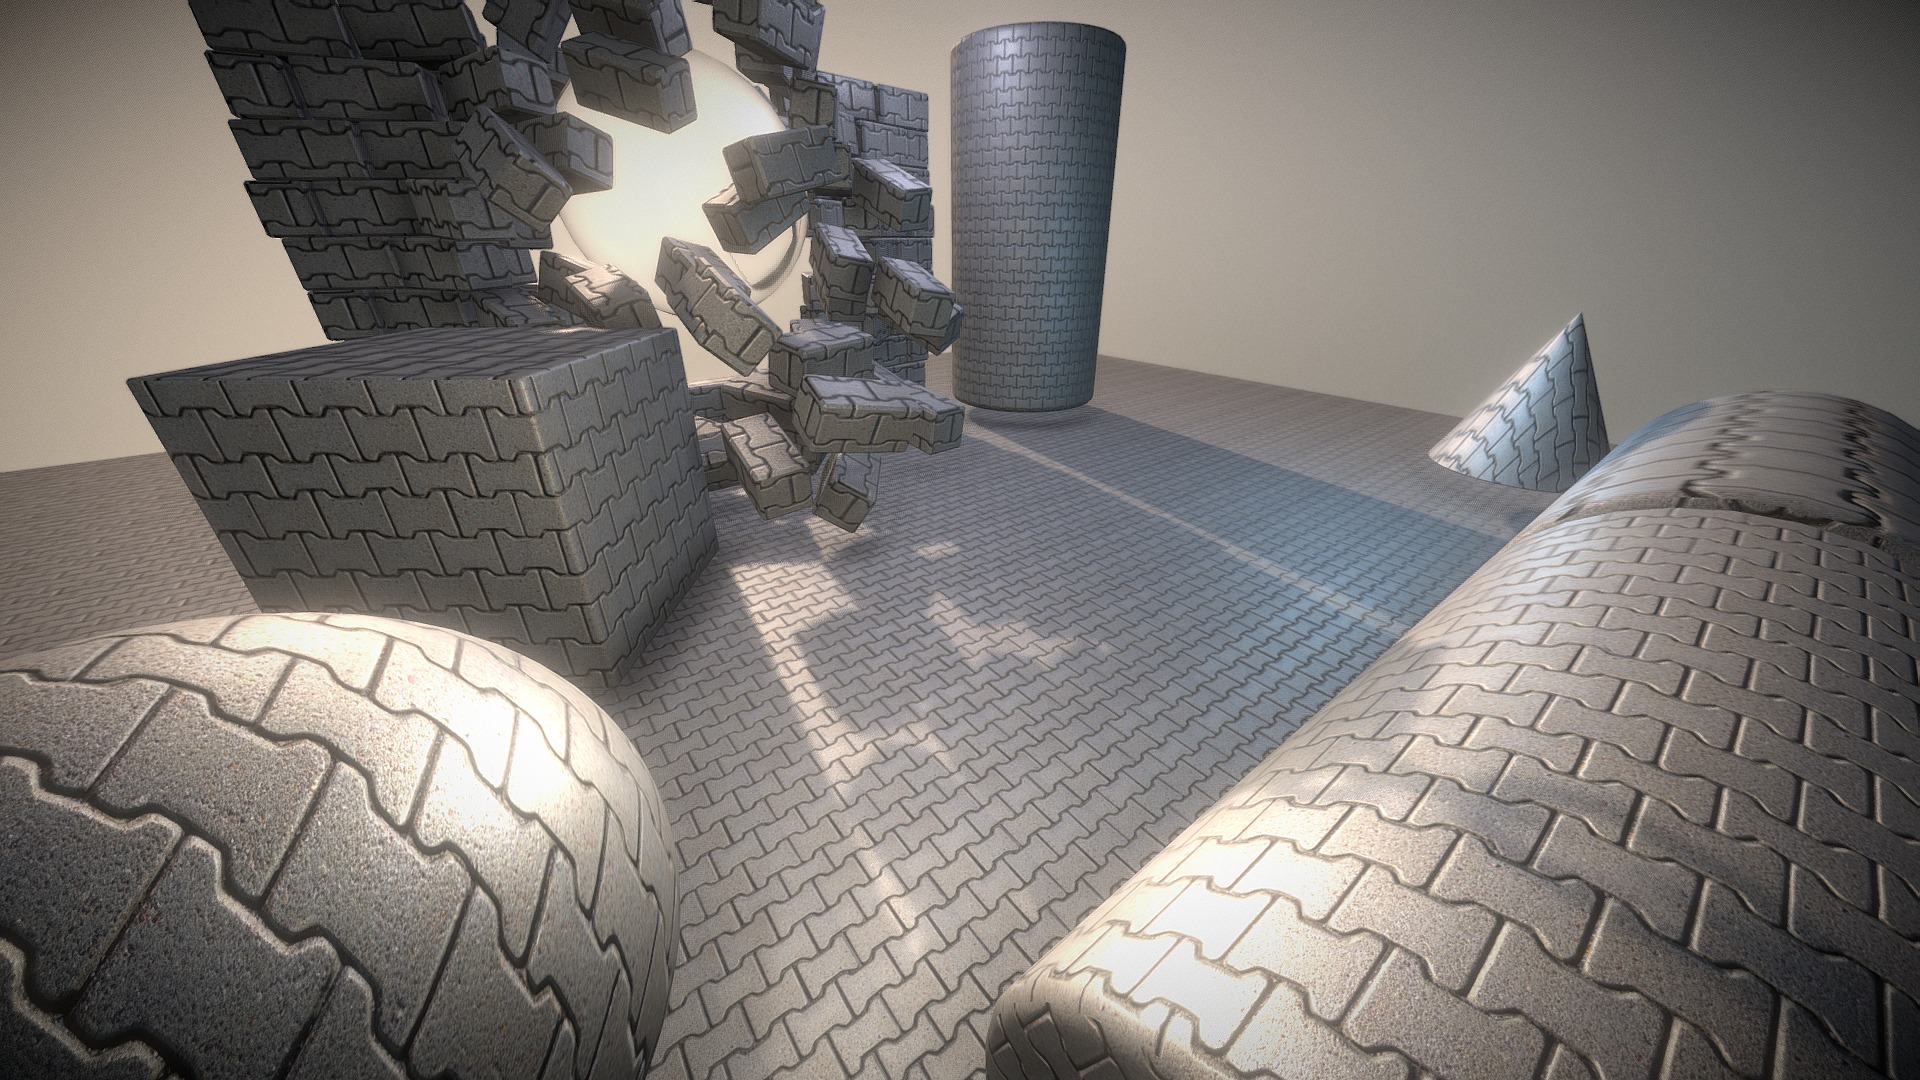 3D model Cobblestone 5 / Texture Set (15) - This is a 3D model of the Cobblestone 5 / Texture Set (15). The 3D model is about a room with stacks of boxes.